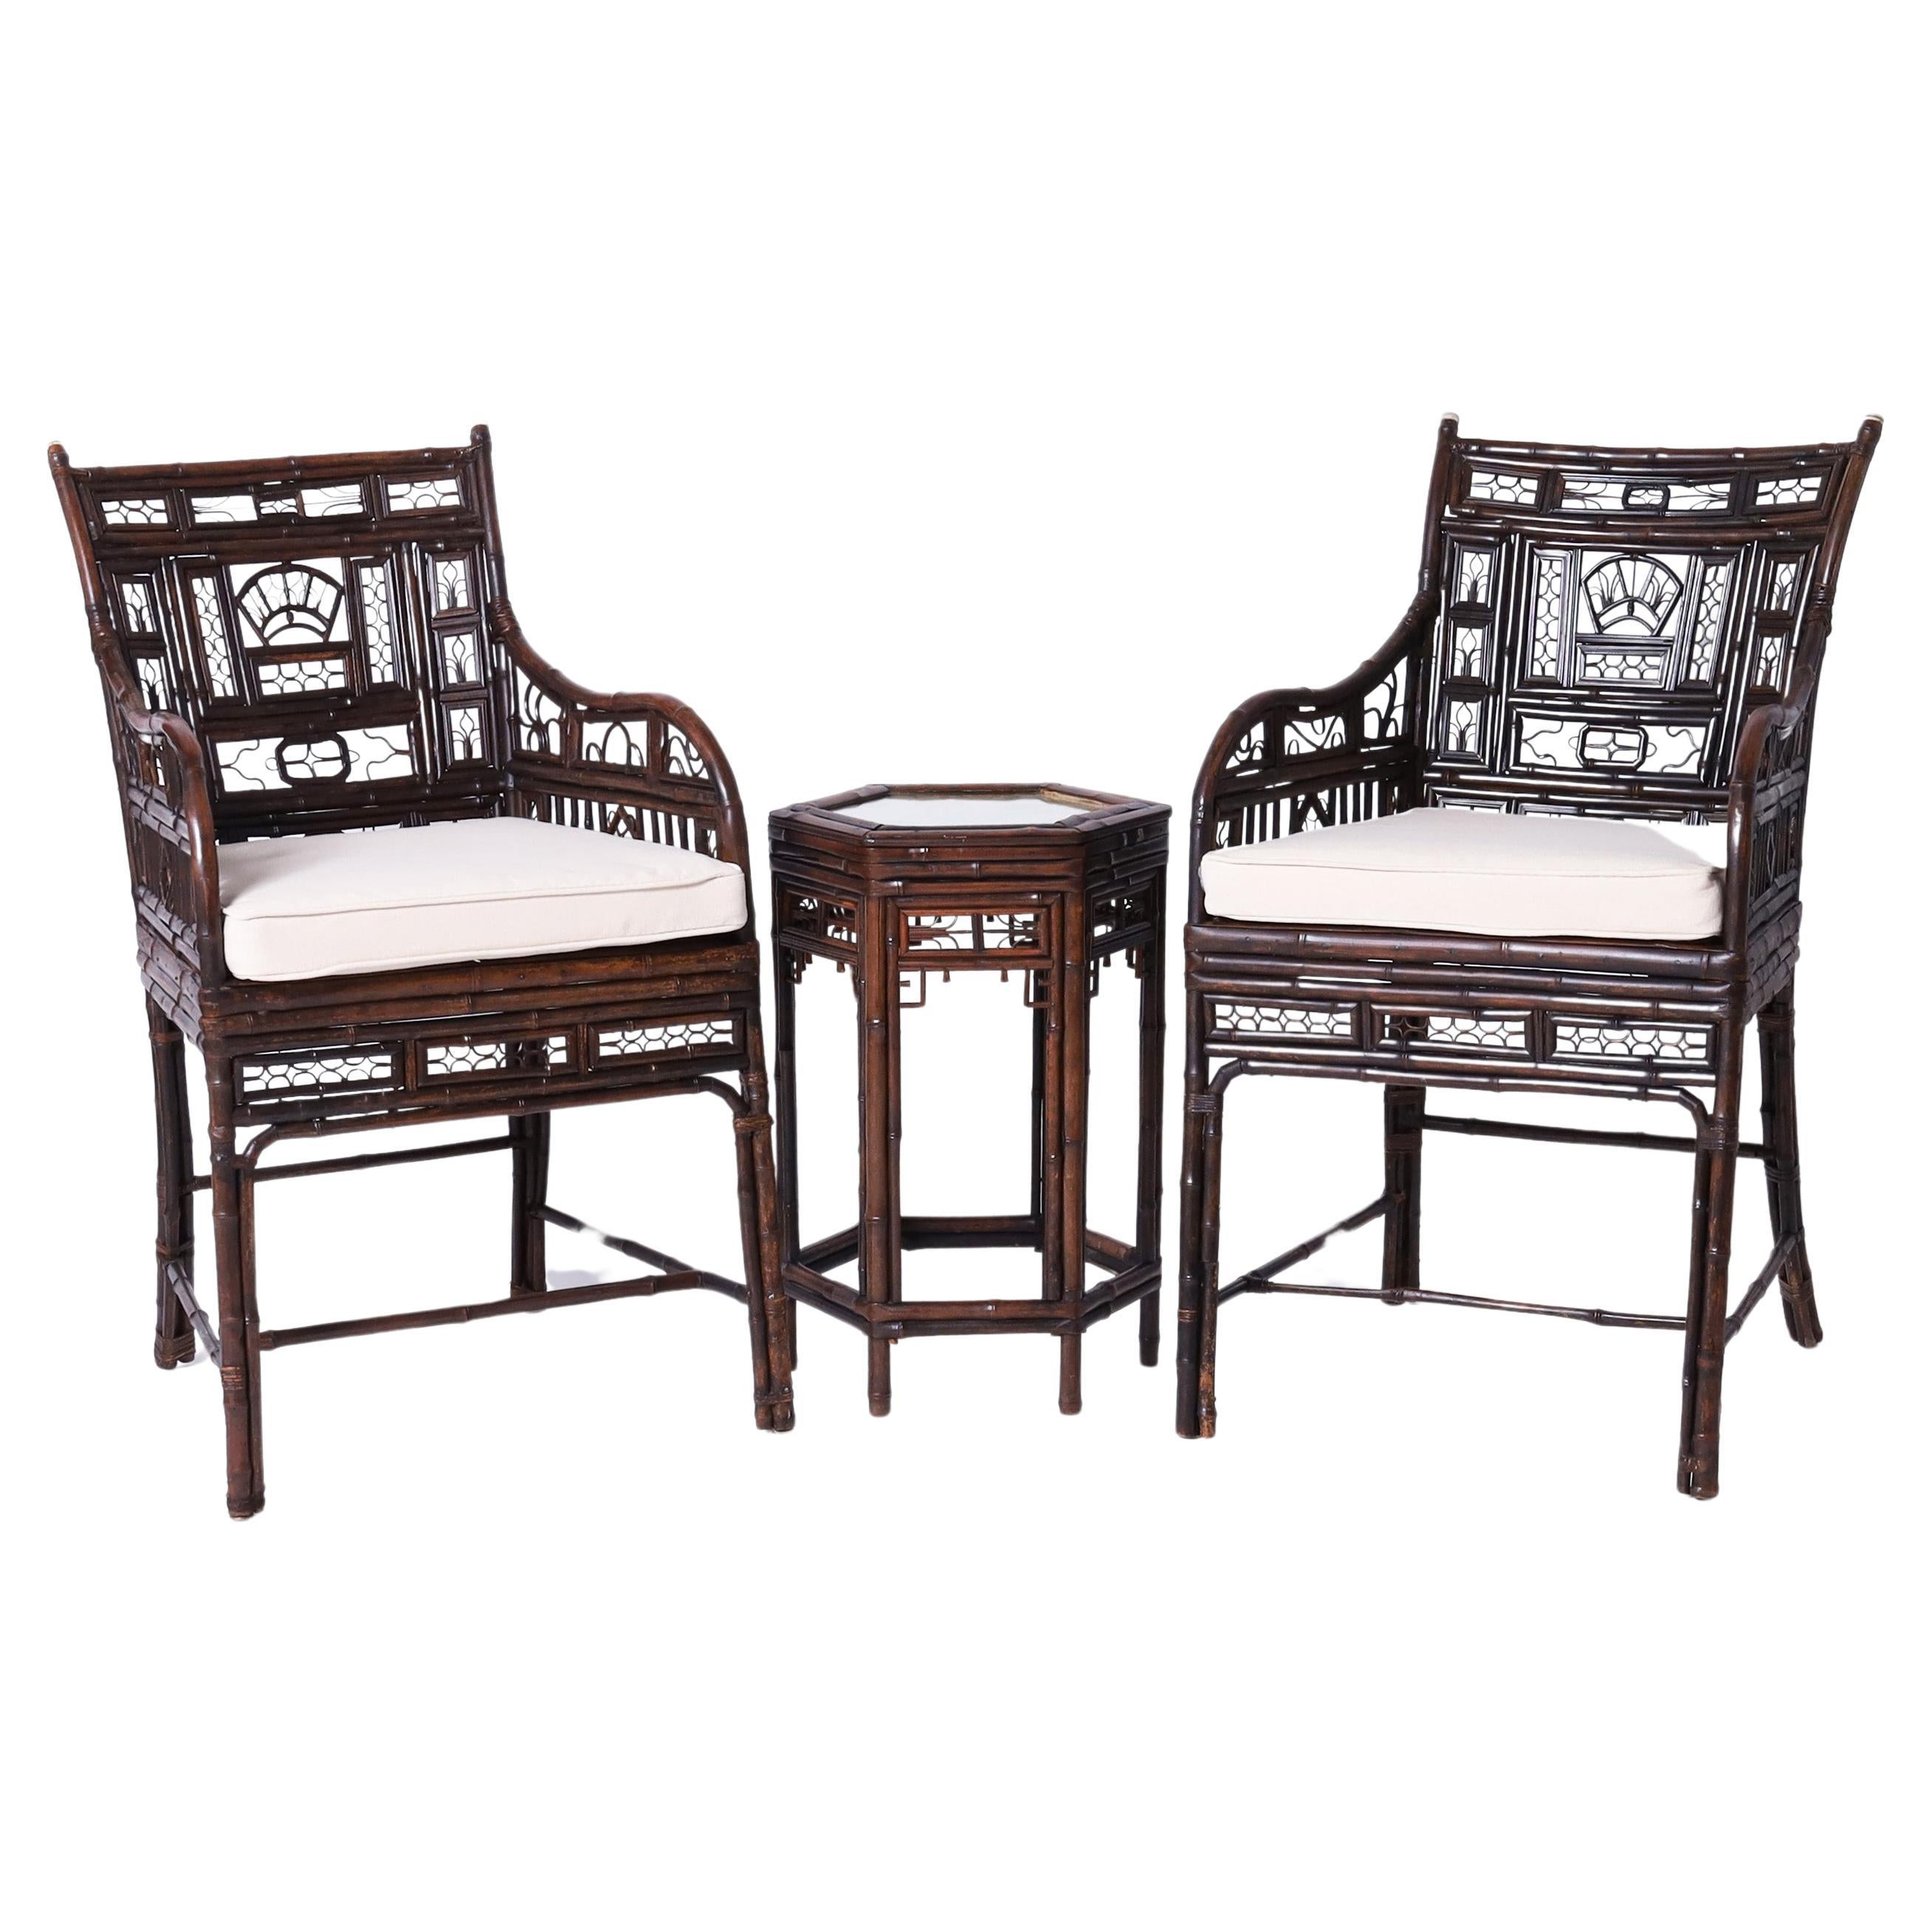 Chinese Export Bamboo and Rattan Pair of Chairs and Stand